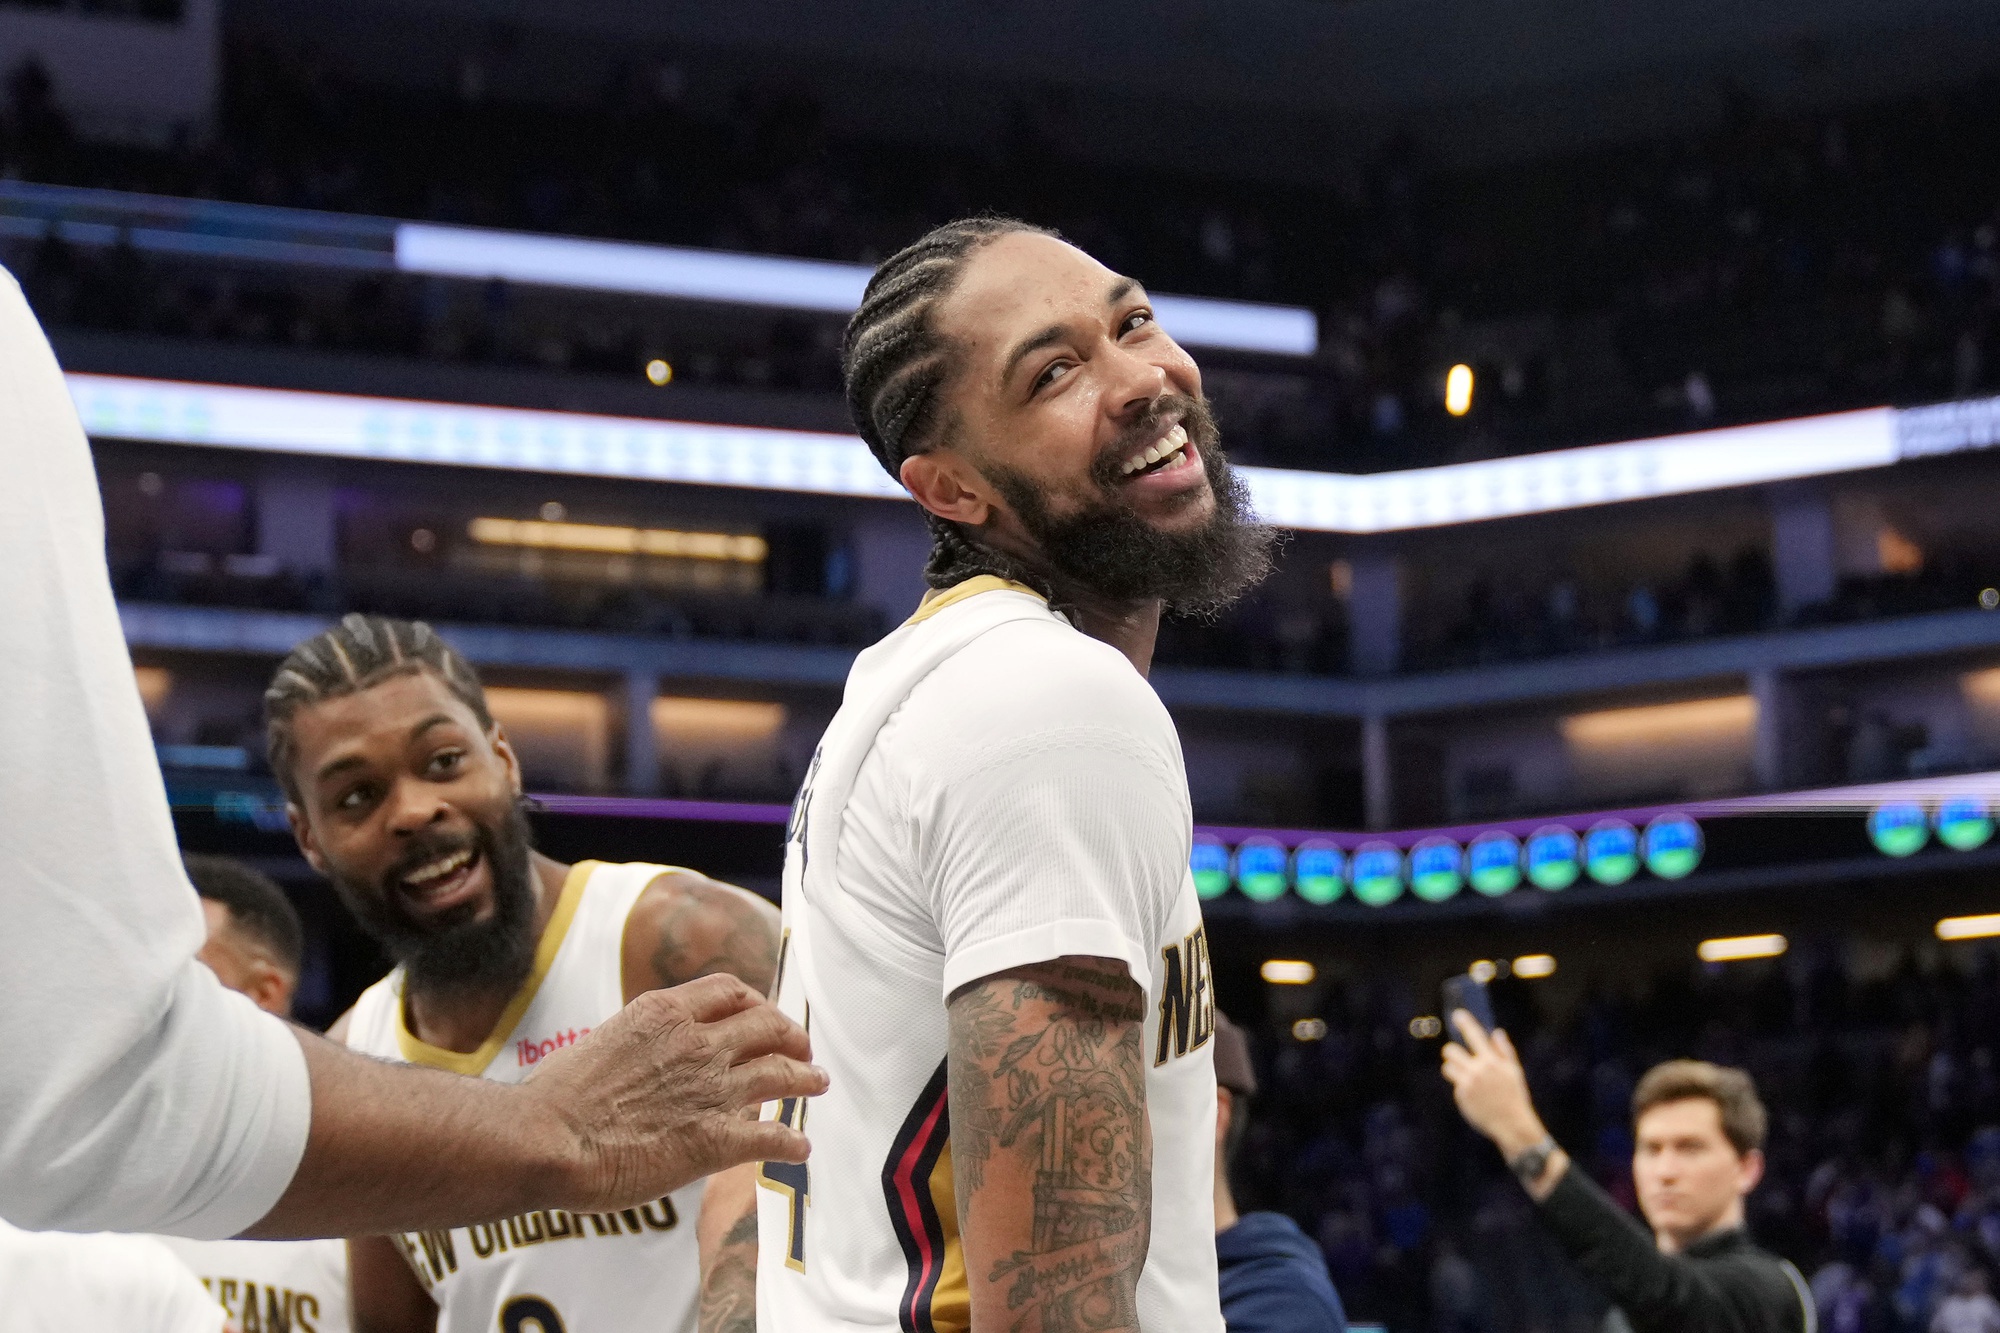 Don’t be fooled by the smile, Brandon Ingram’s a proven big-time player